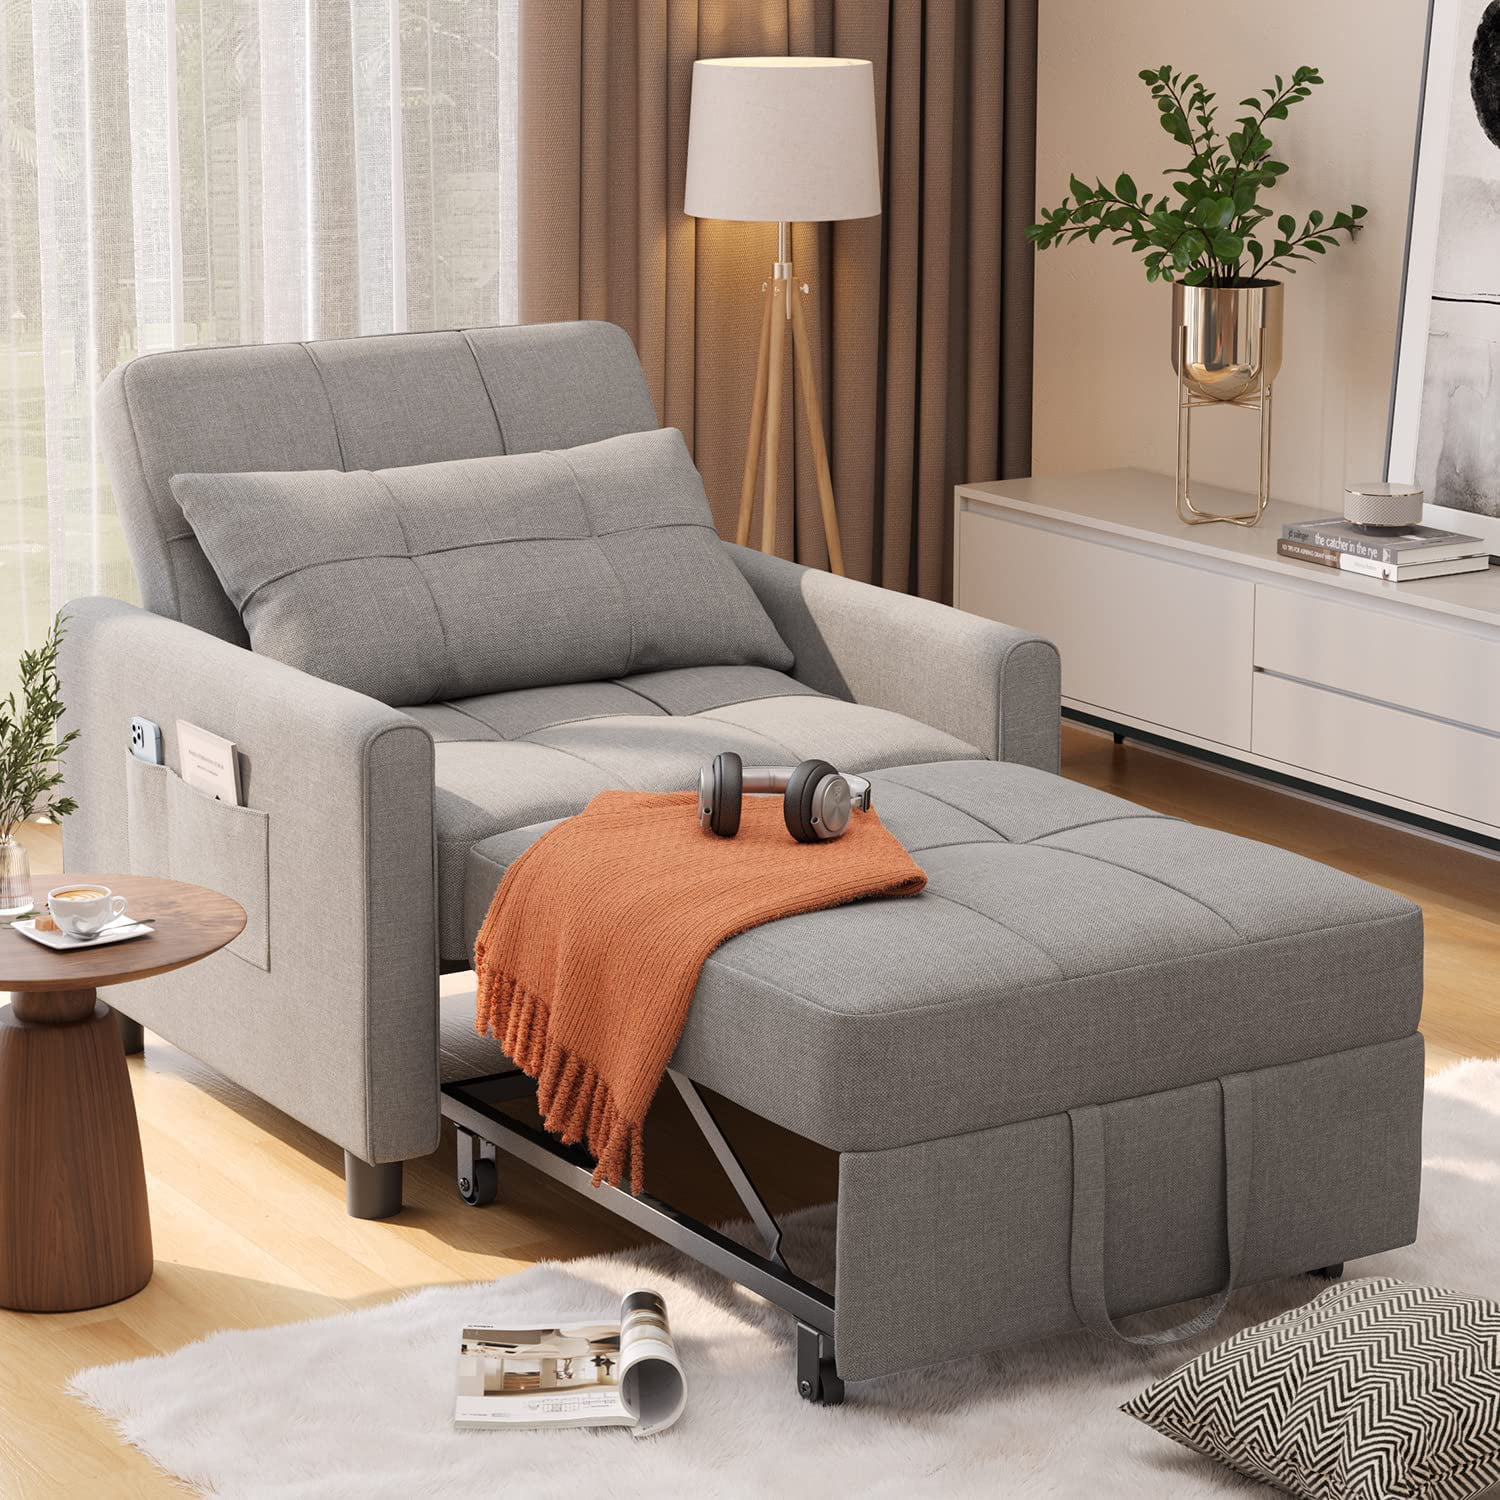 Aiho Convertible Chair Bed 3 in 1, Multi-Functional Adjustable Recliner, Sofa, Bed, Single Bed Chair with Modern Linen Fabric,Grey